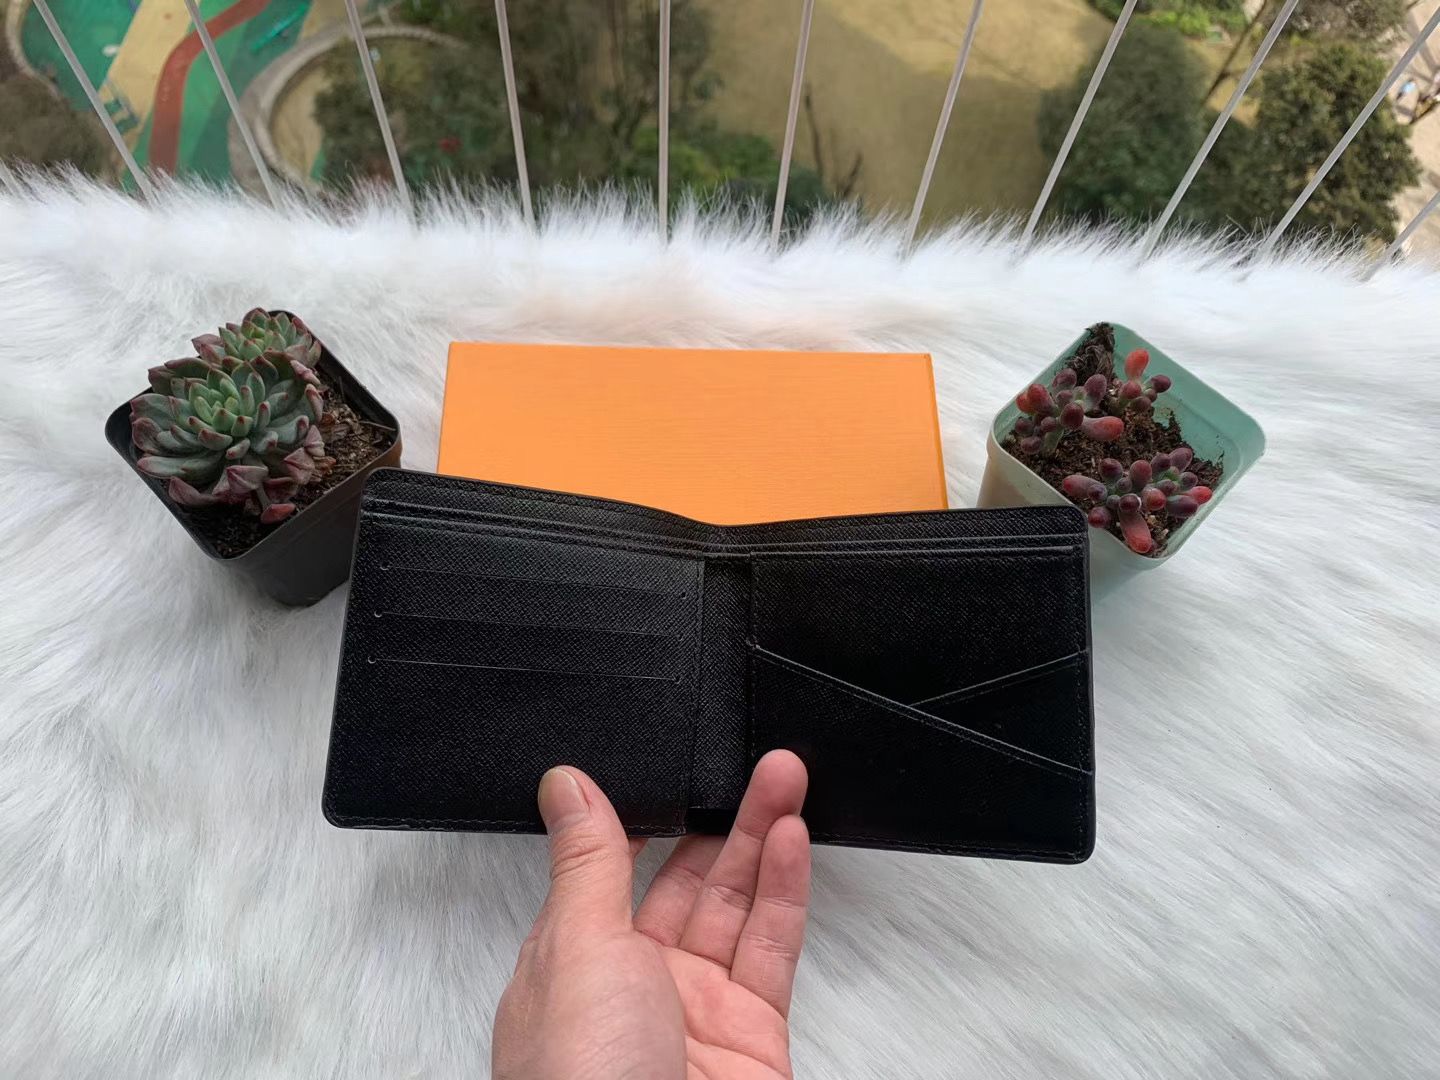 2020 New Bag Billfold High Quality Plaid Pattern Women Wallet Men Pures  High End Designer Wallet With Box 60223 From Selections, $15.32